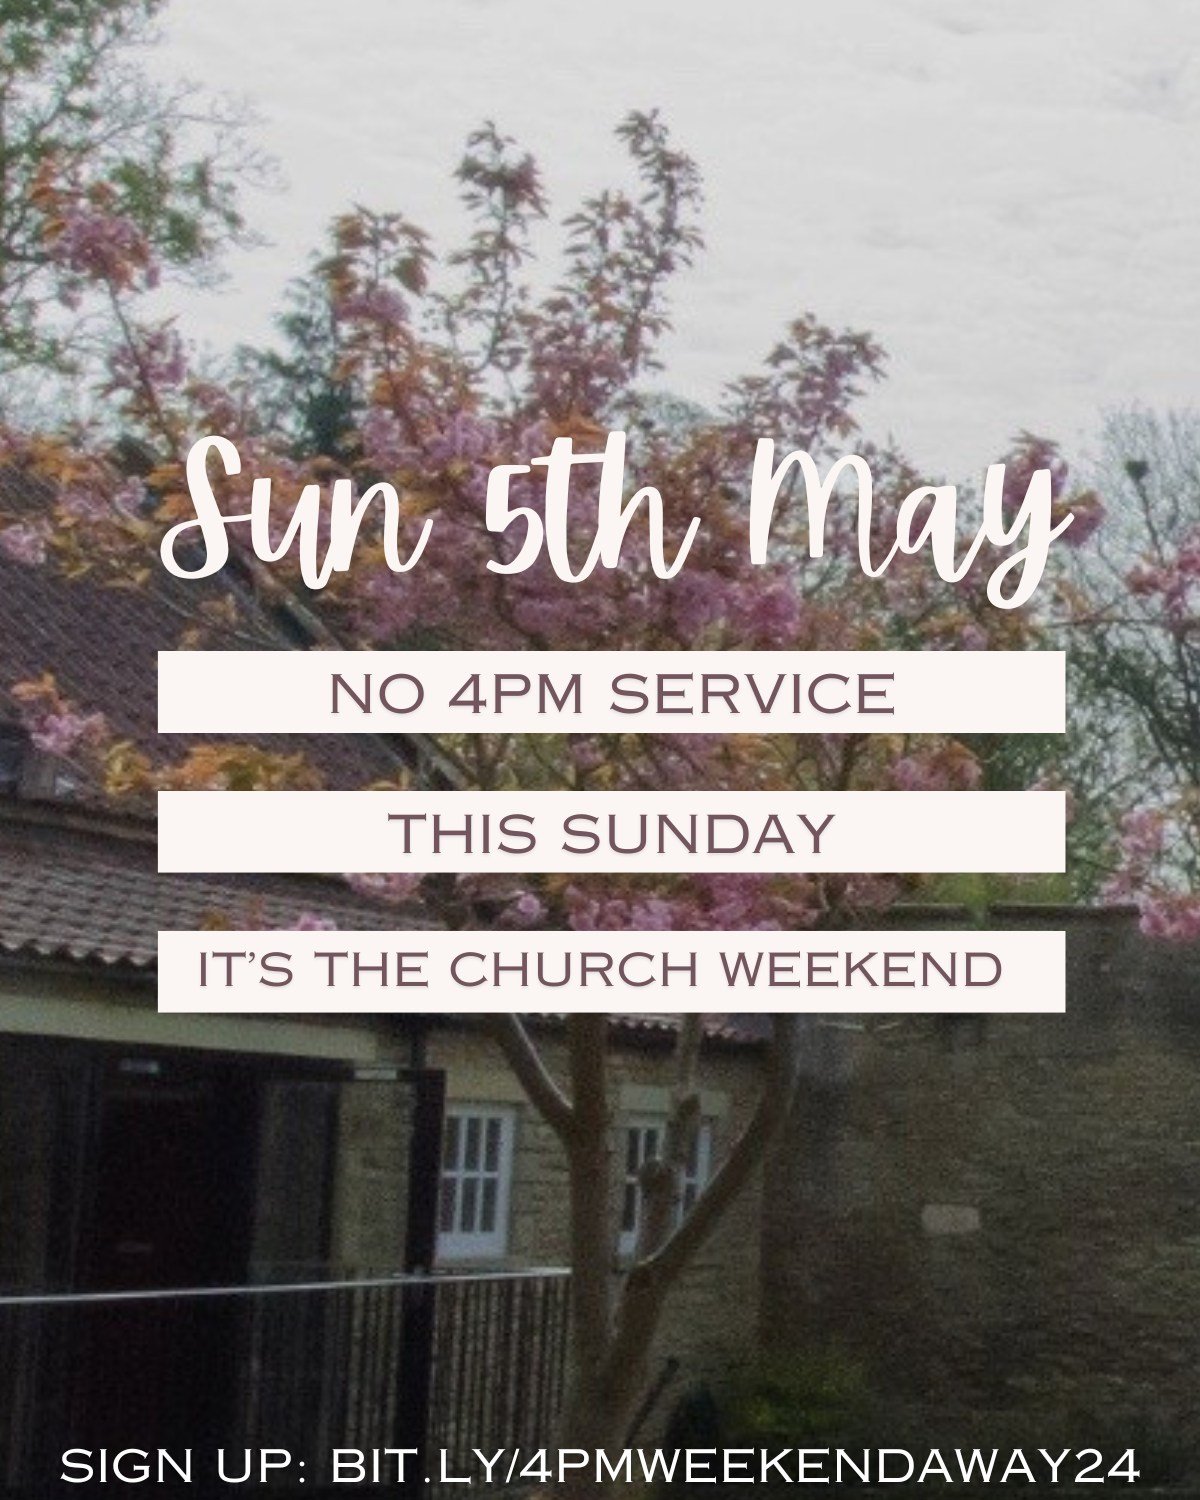 There's no Church in a Building this Sunday (5th May) as we're going away for the Church Weekend. We're back next week at 4pm.

It's not too late to join us for the day on Saturday or Sunday. Sign-up here: bit.ly/4pmWeekendAway24